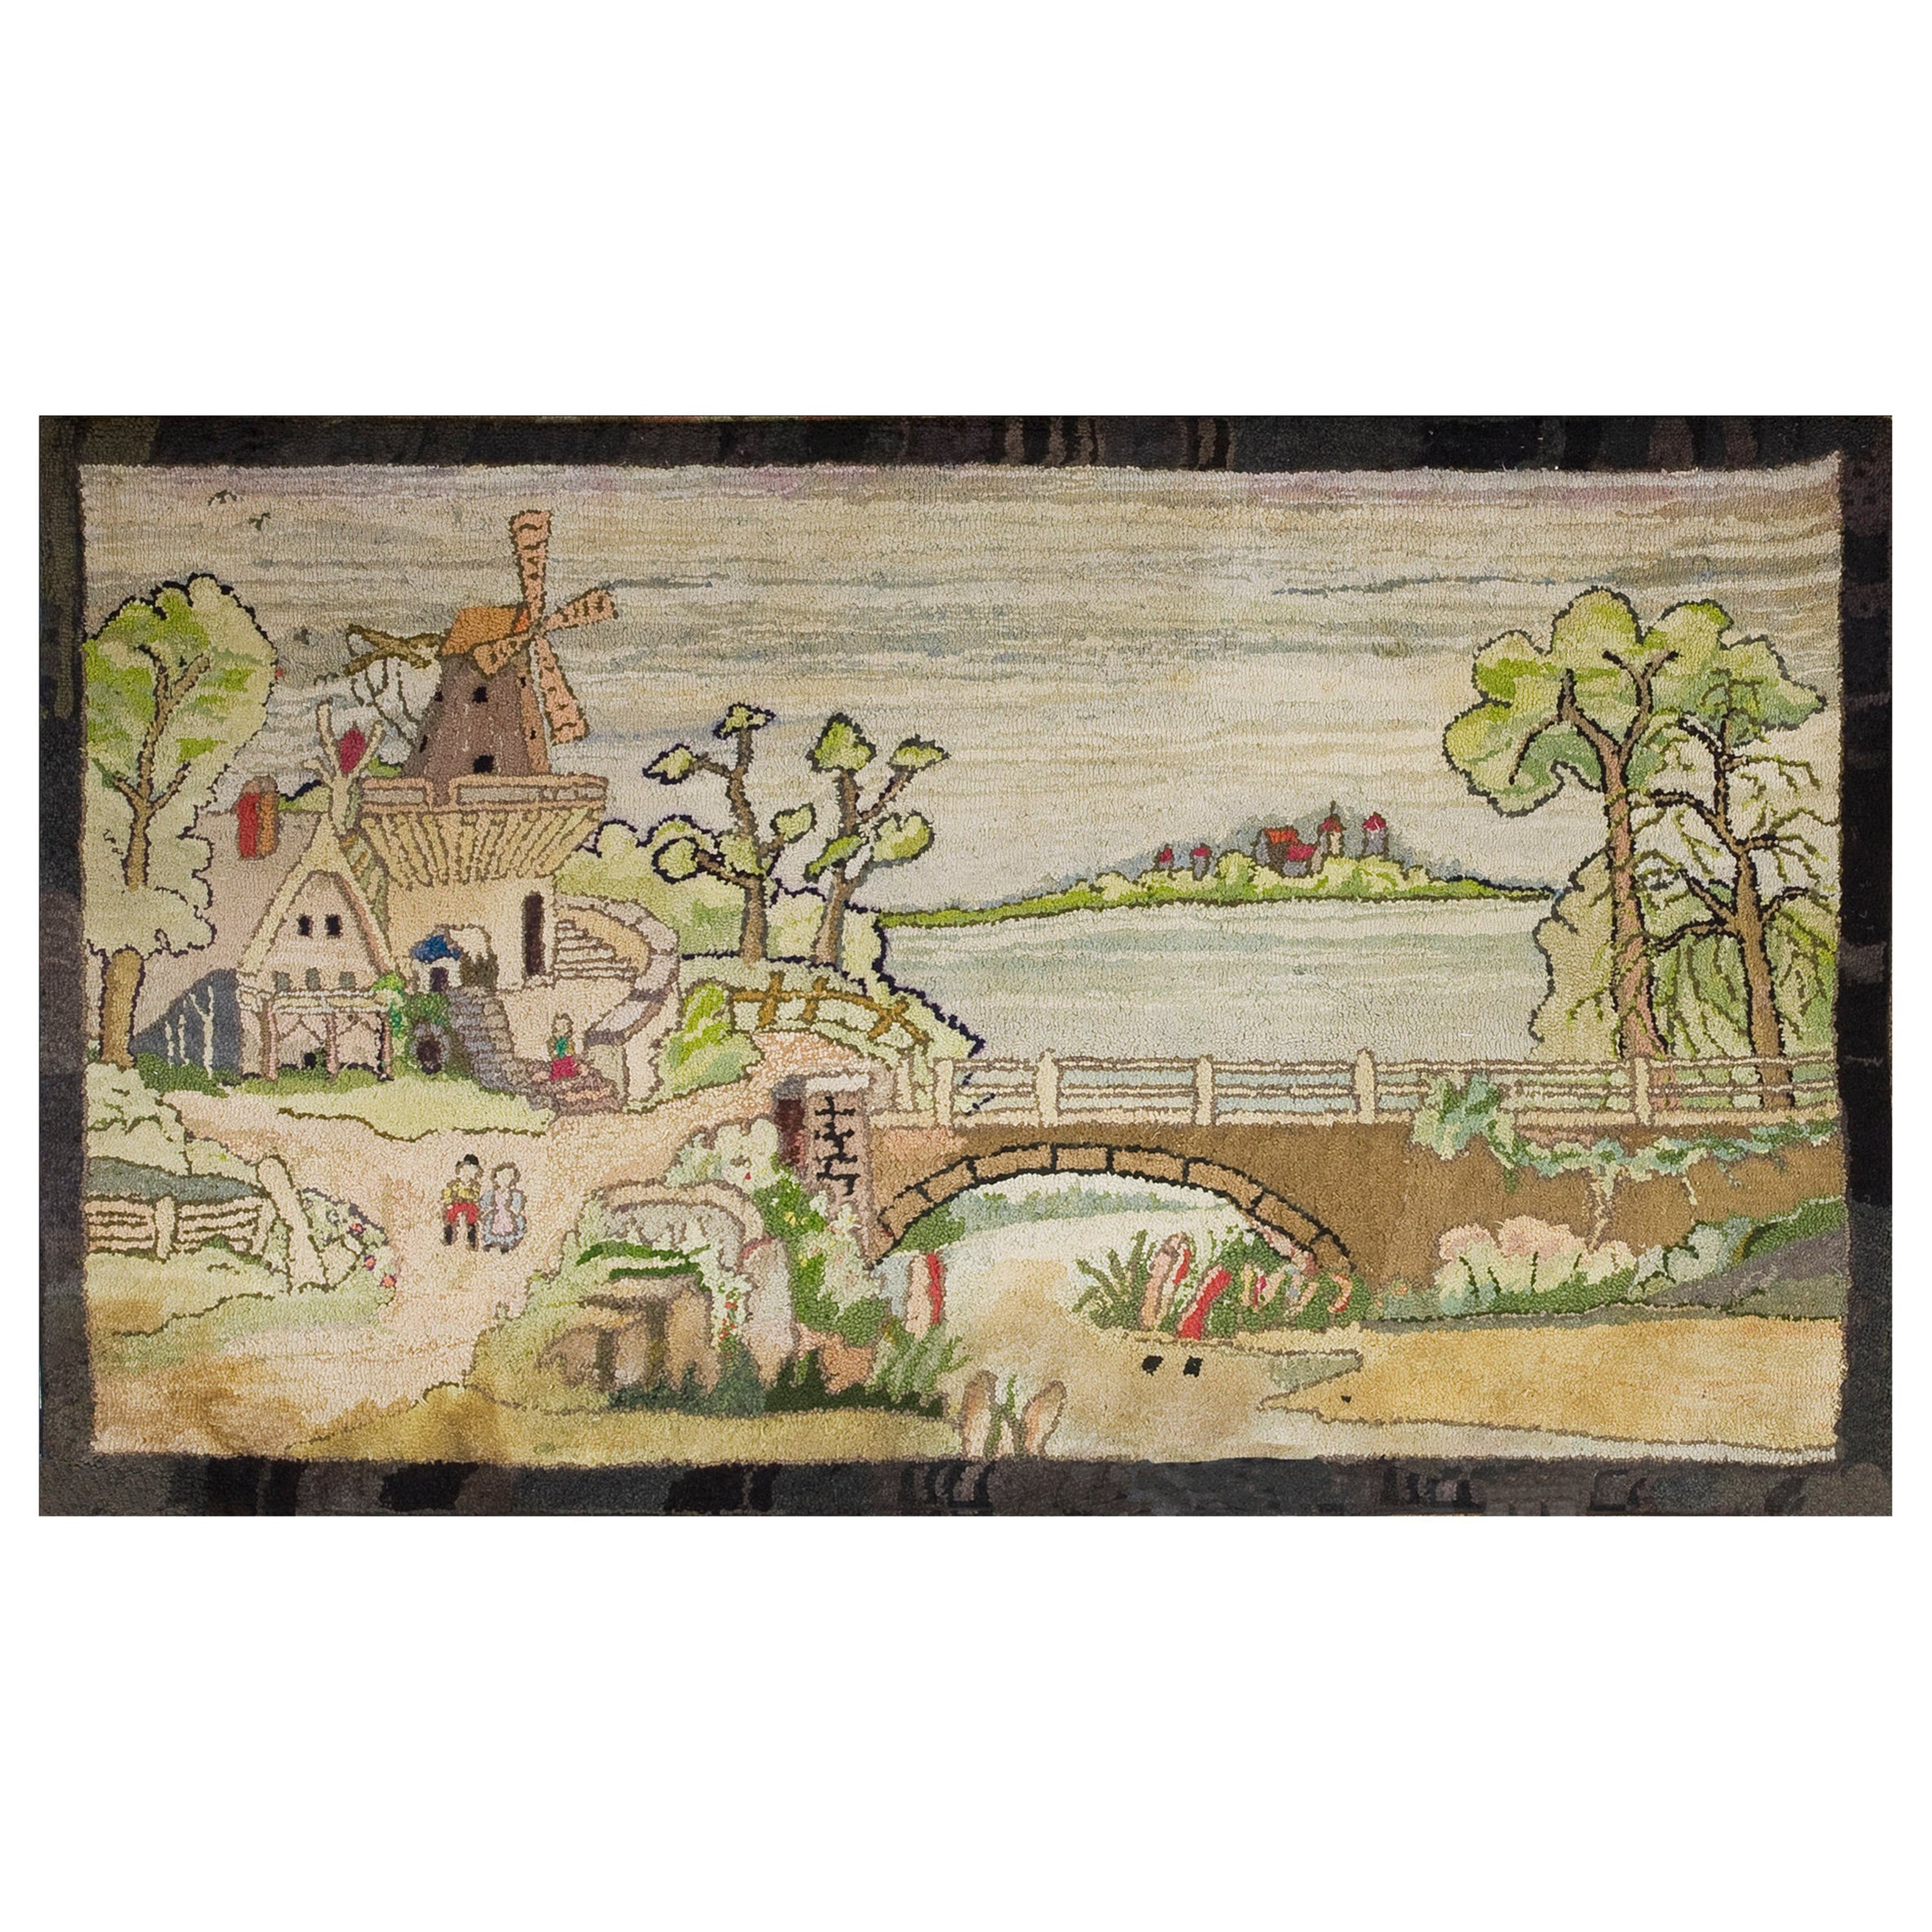 Mid 20th Century Pictorial American Hooked Rug ( 3'2" x 5'6" - 97 x 168 ) For Sale